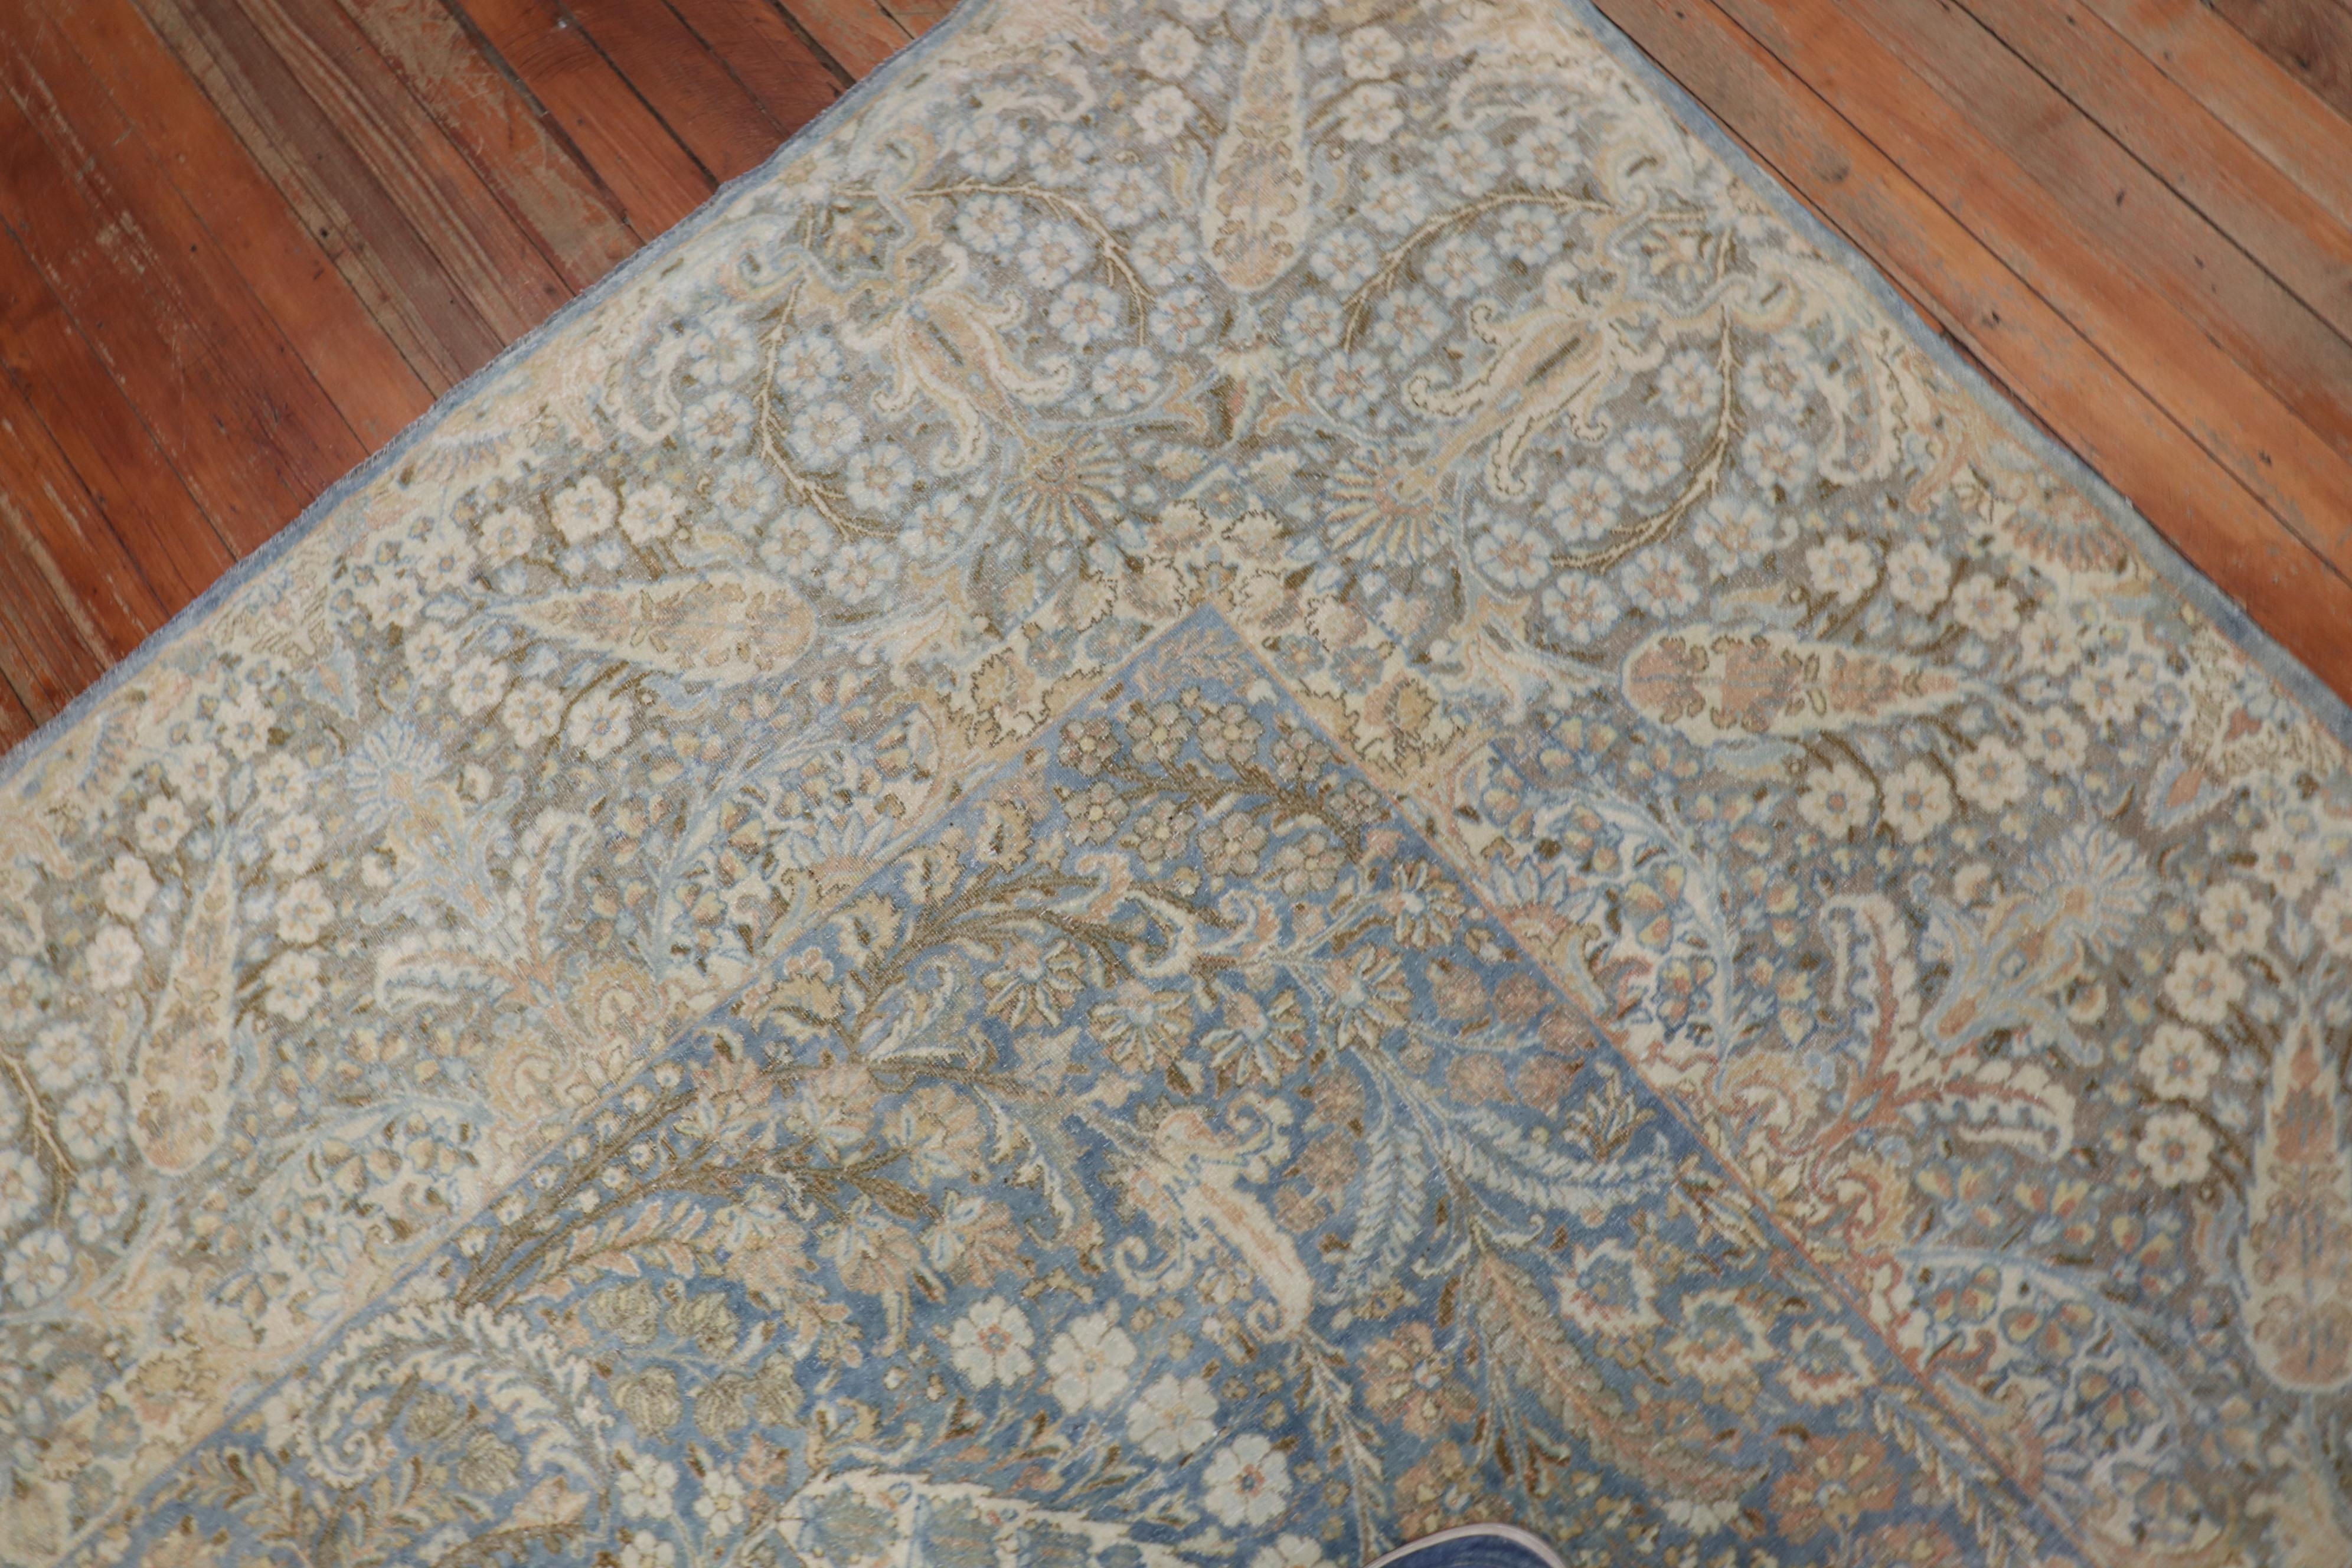 A room size handmade Persian Kerman rug with sand and brown accents on a light blue field

circa 1920. Measures: 8'9